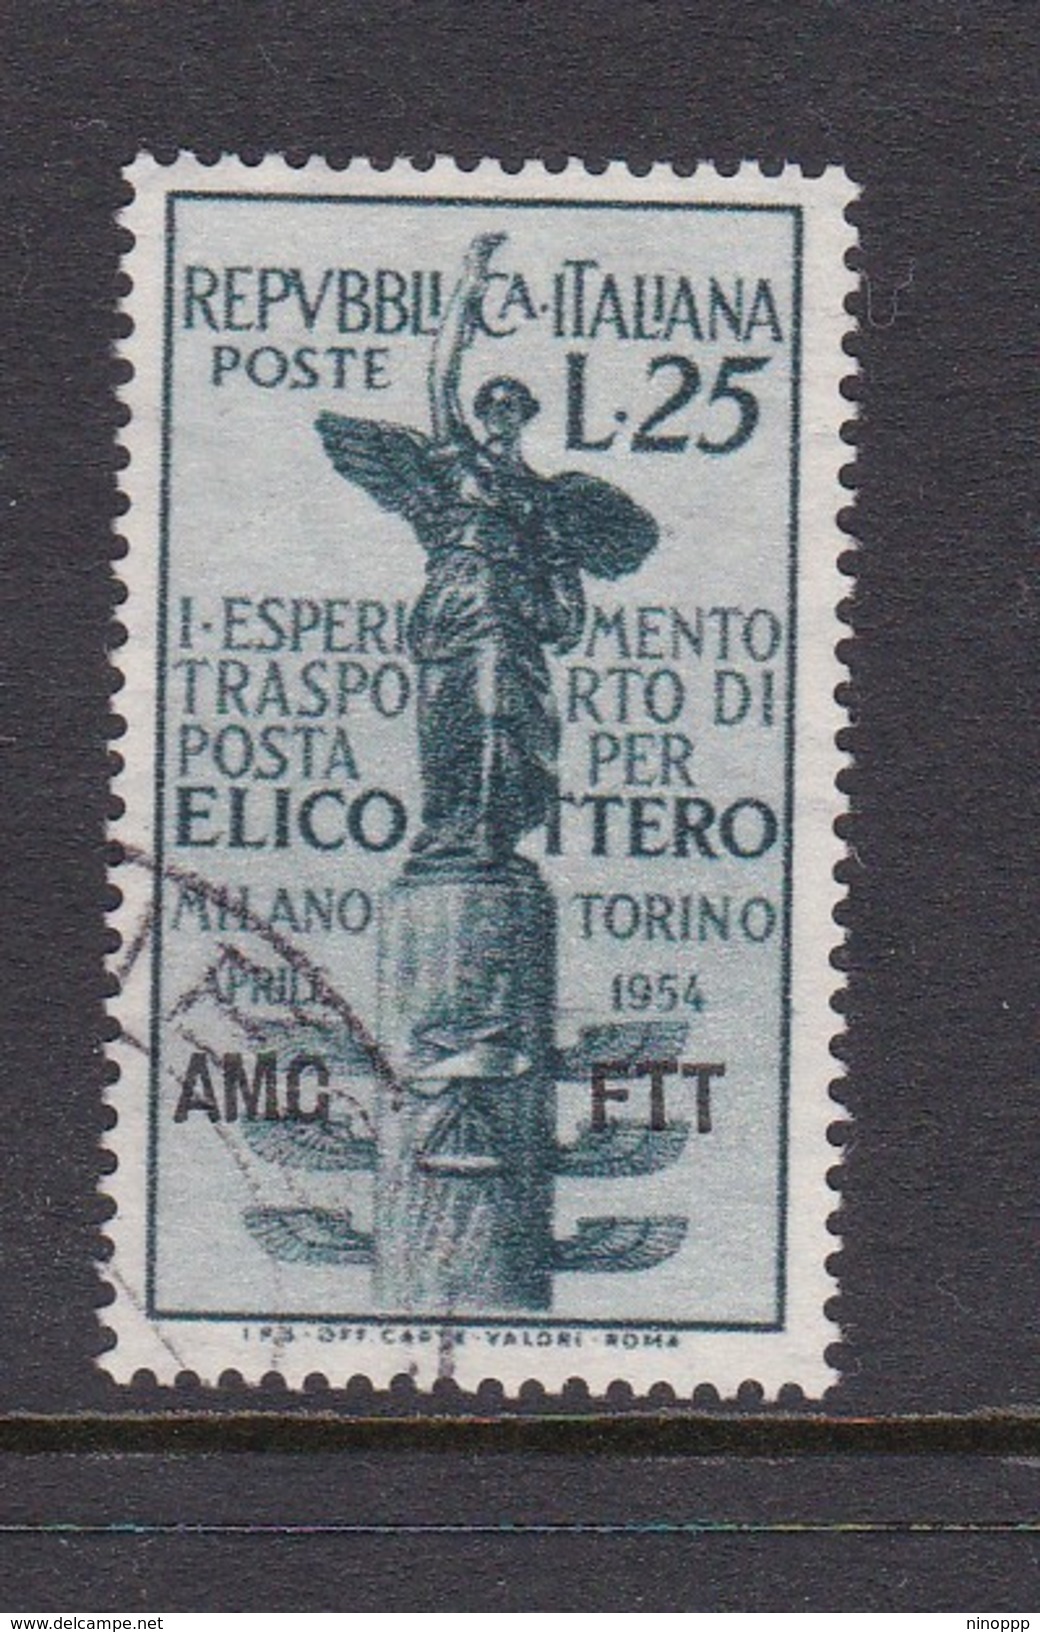 Trieste Allied Military Government S 199 1954 Milan-Turin Helicopter Flight Mail, Used - Used